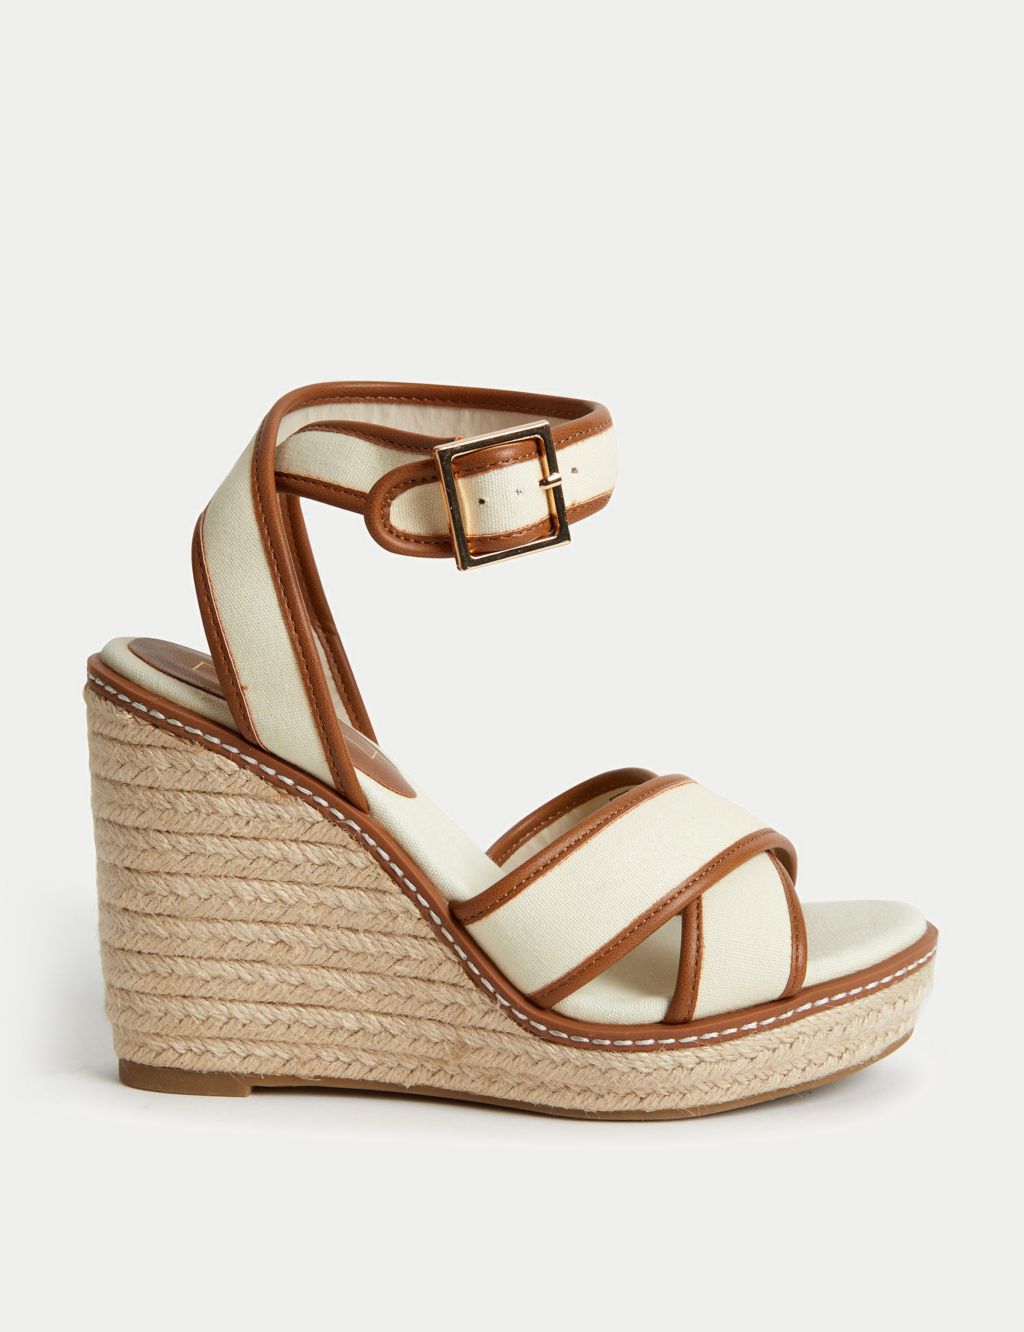 Canvas Crossover Wedge Espadrilles image 1